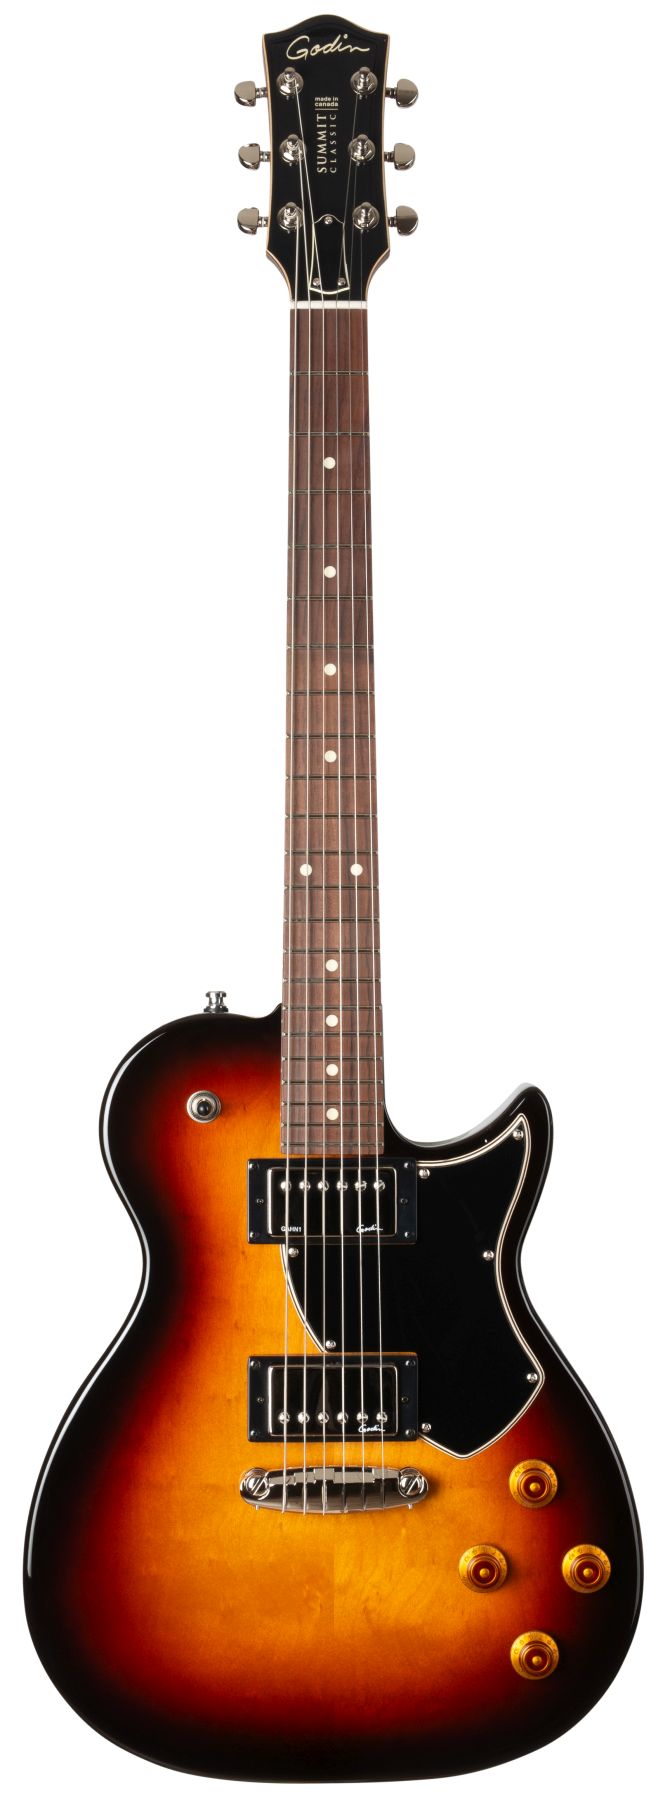 Godin Summit Classic HG 6-String RH Electric Guitar with Gig Bag-Vintage Burst MADE In CANADA D